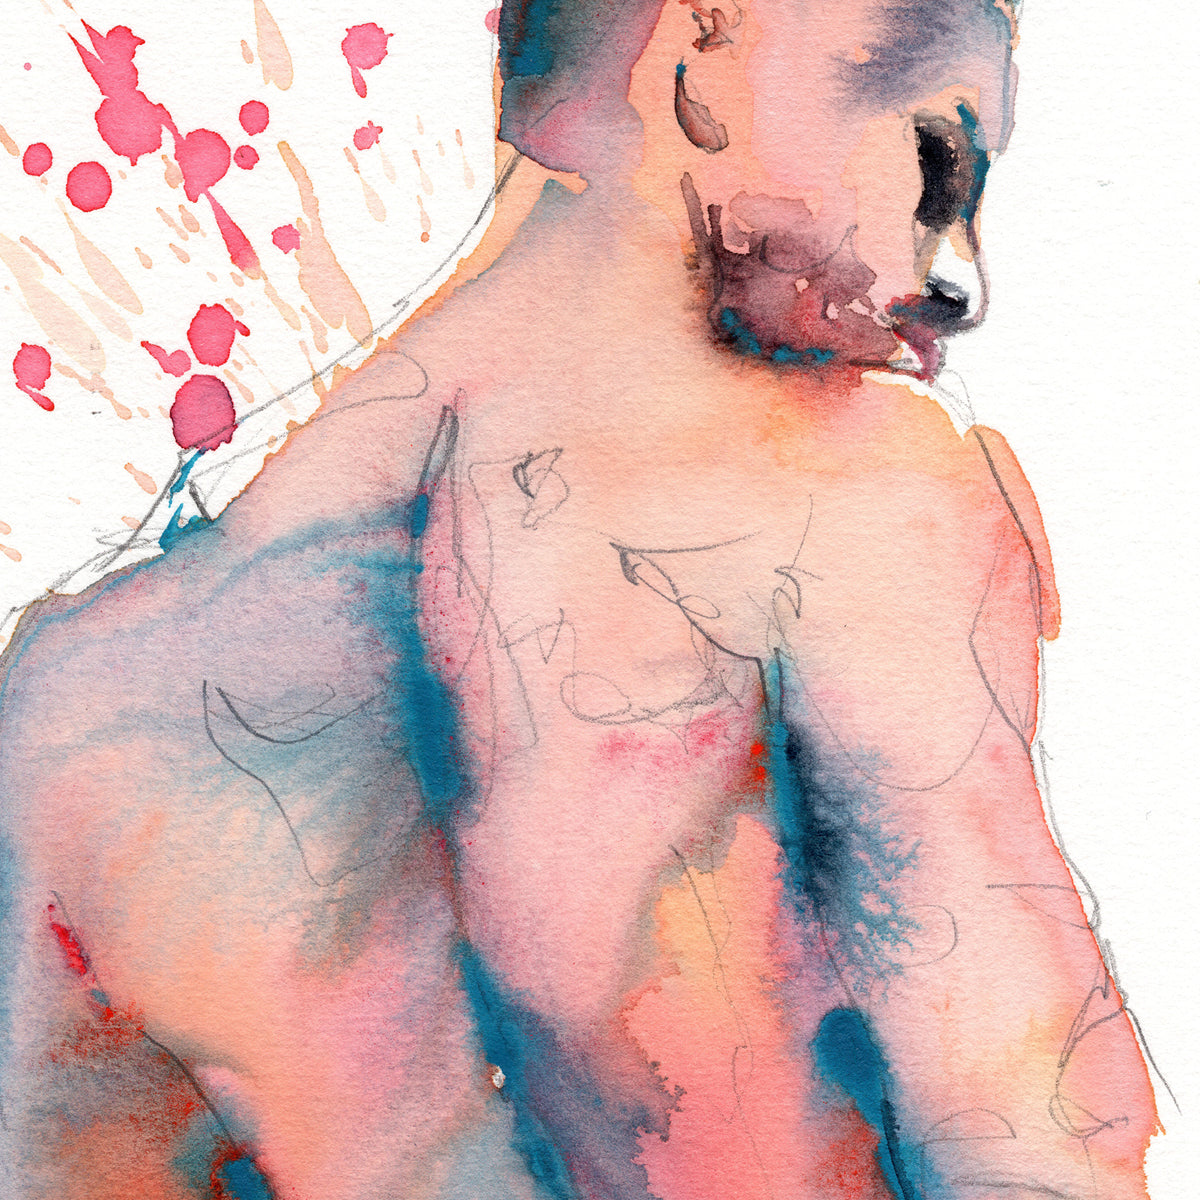 Nude Male, Standing with Splattered Background - 6x9" Original Watercolor Painting